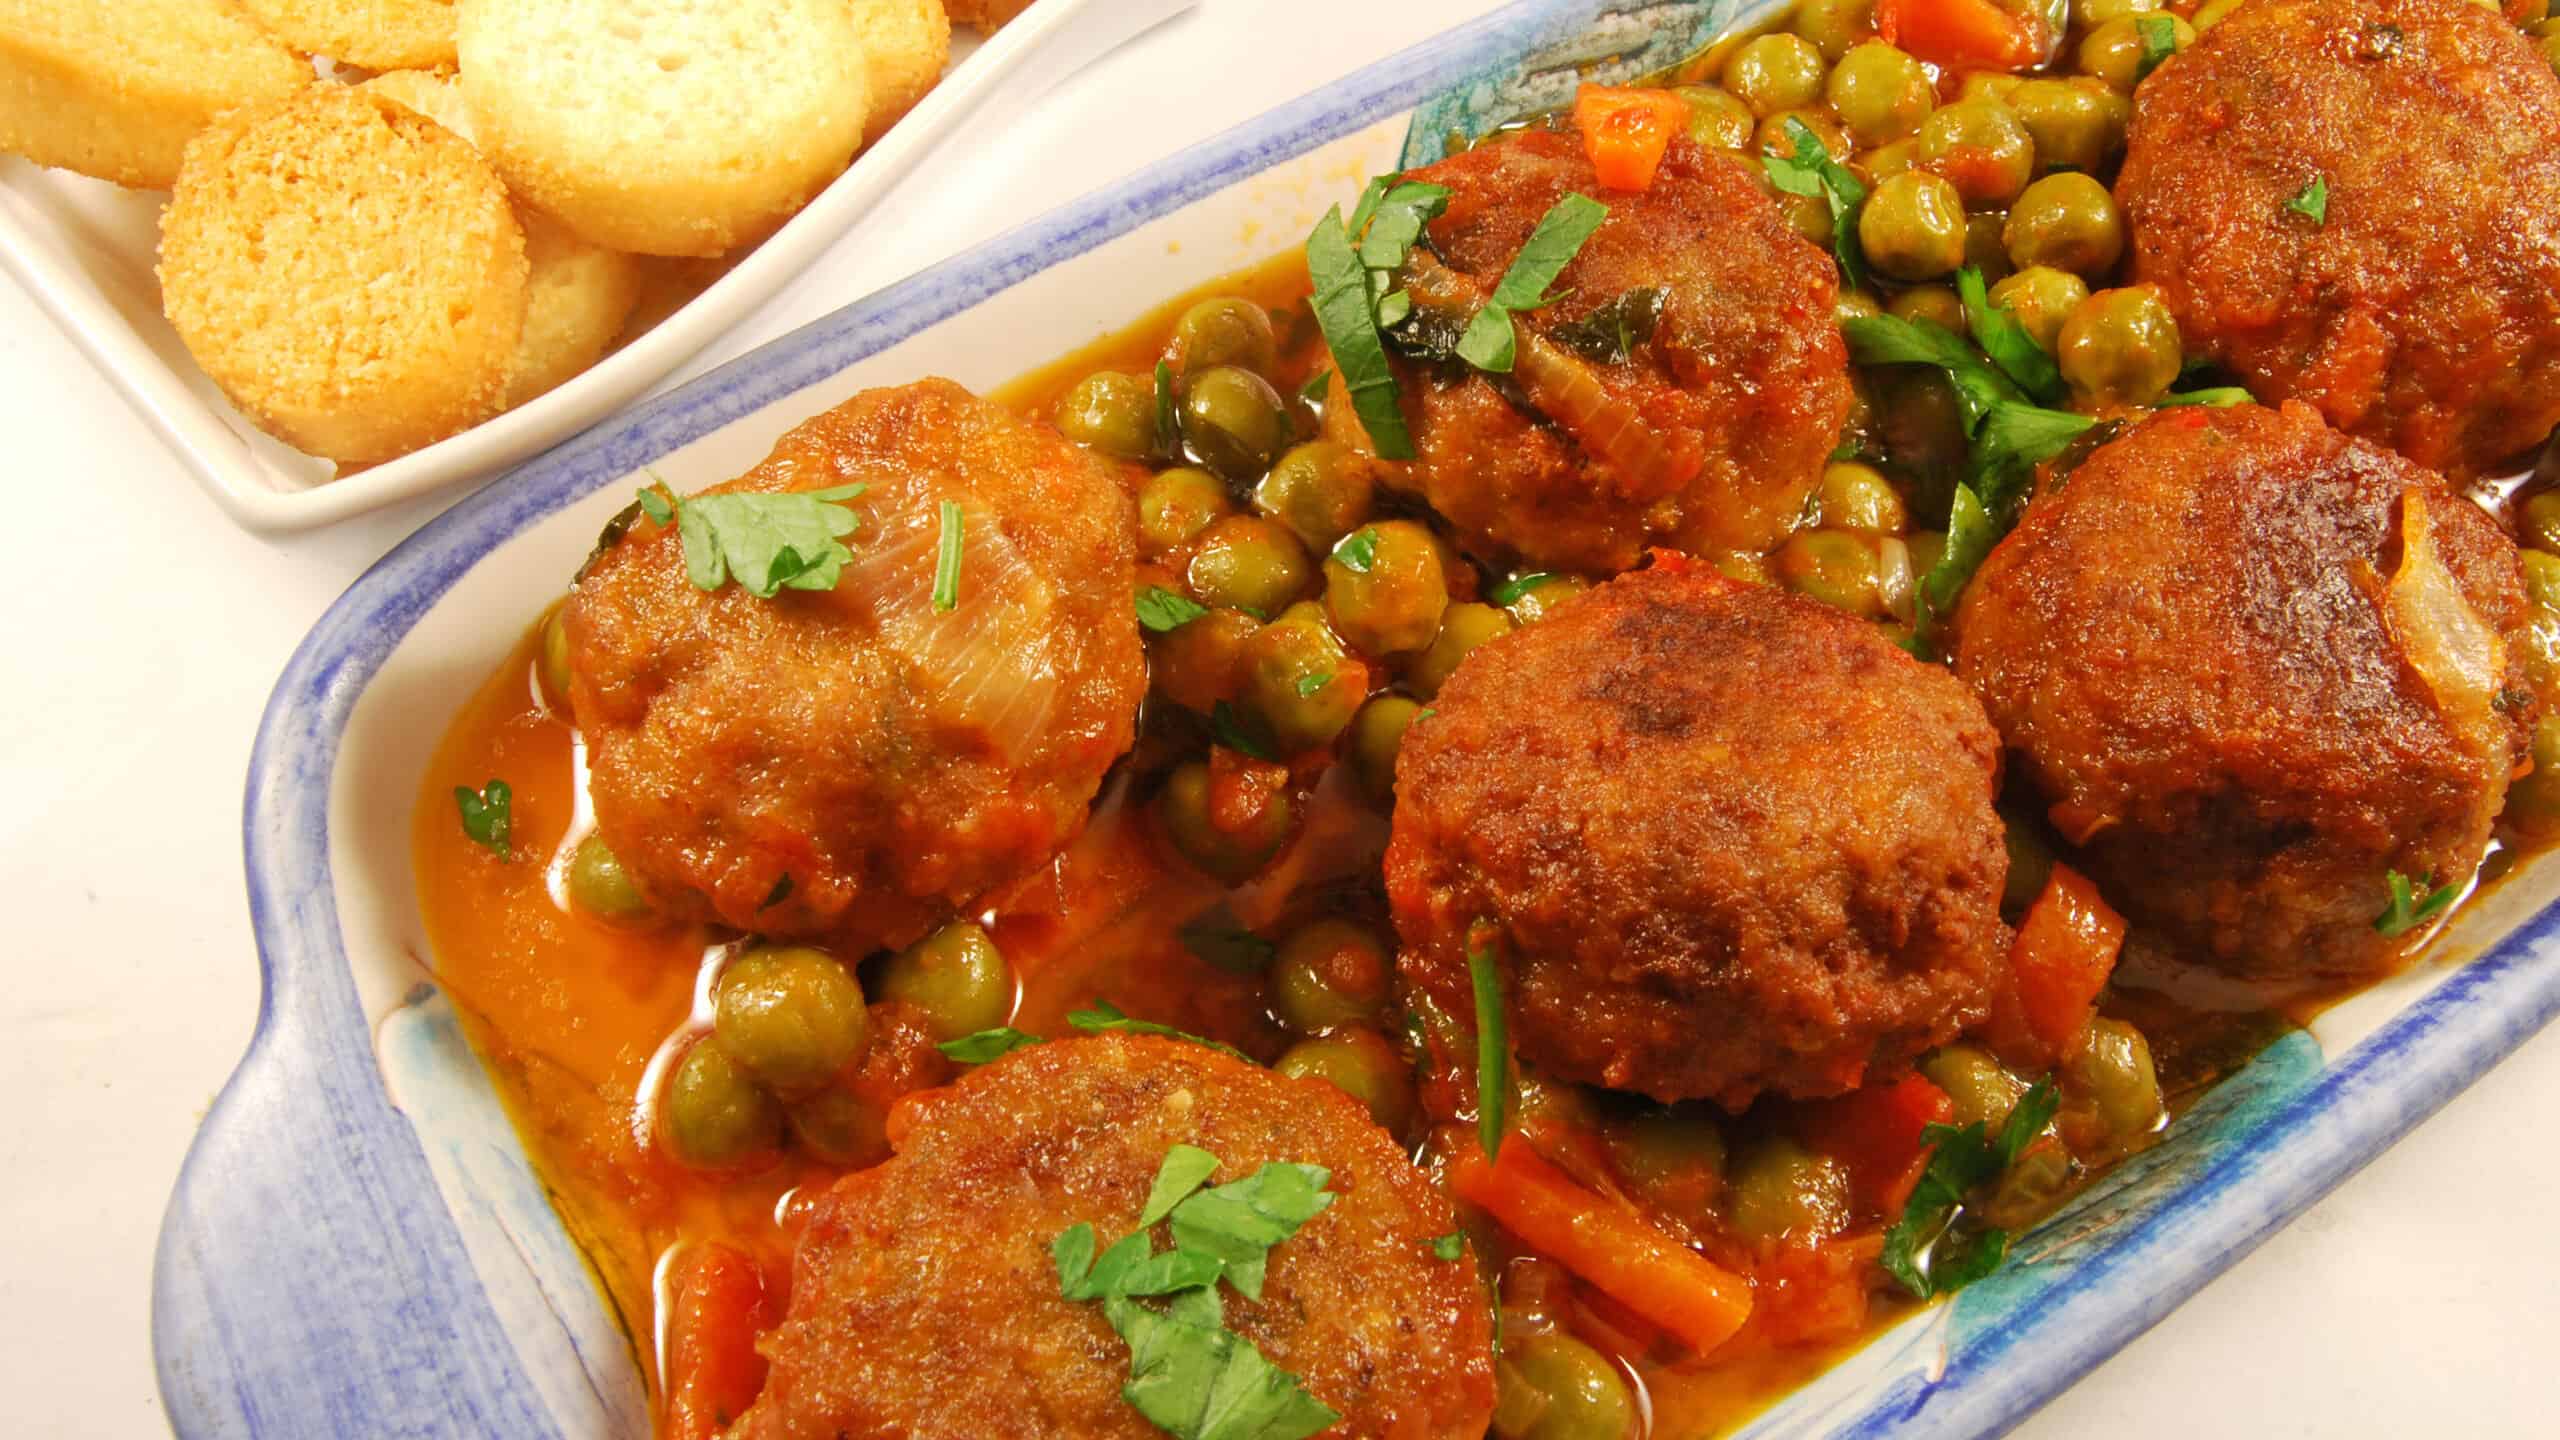 A tray of meatballs in tomato sauce with green peas accompanied by toasted bread with rosemary